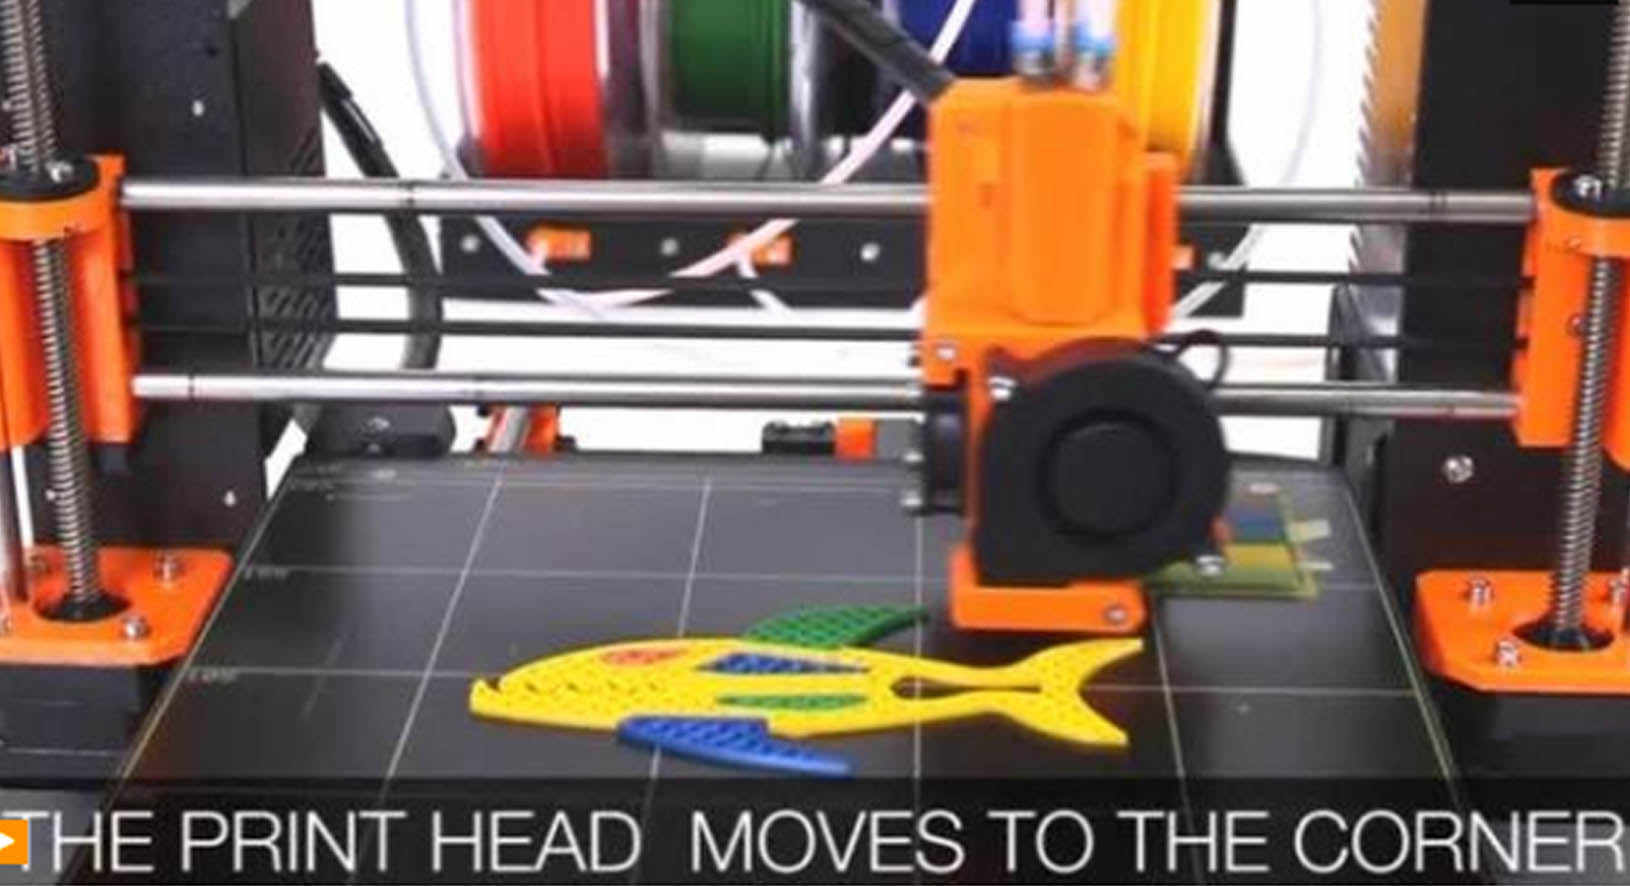 A Czech firm releases a consumer 3D printer with an innovative printing head, allowing for the use of four different materials or colours simultaneously. (Photo courtesy to Reuters video)